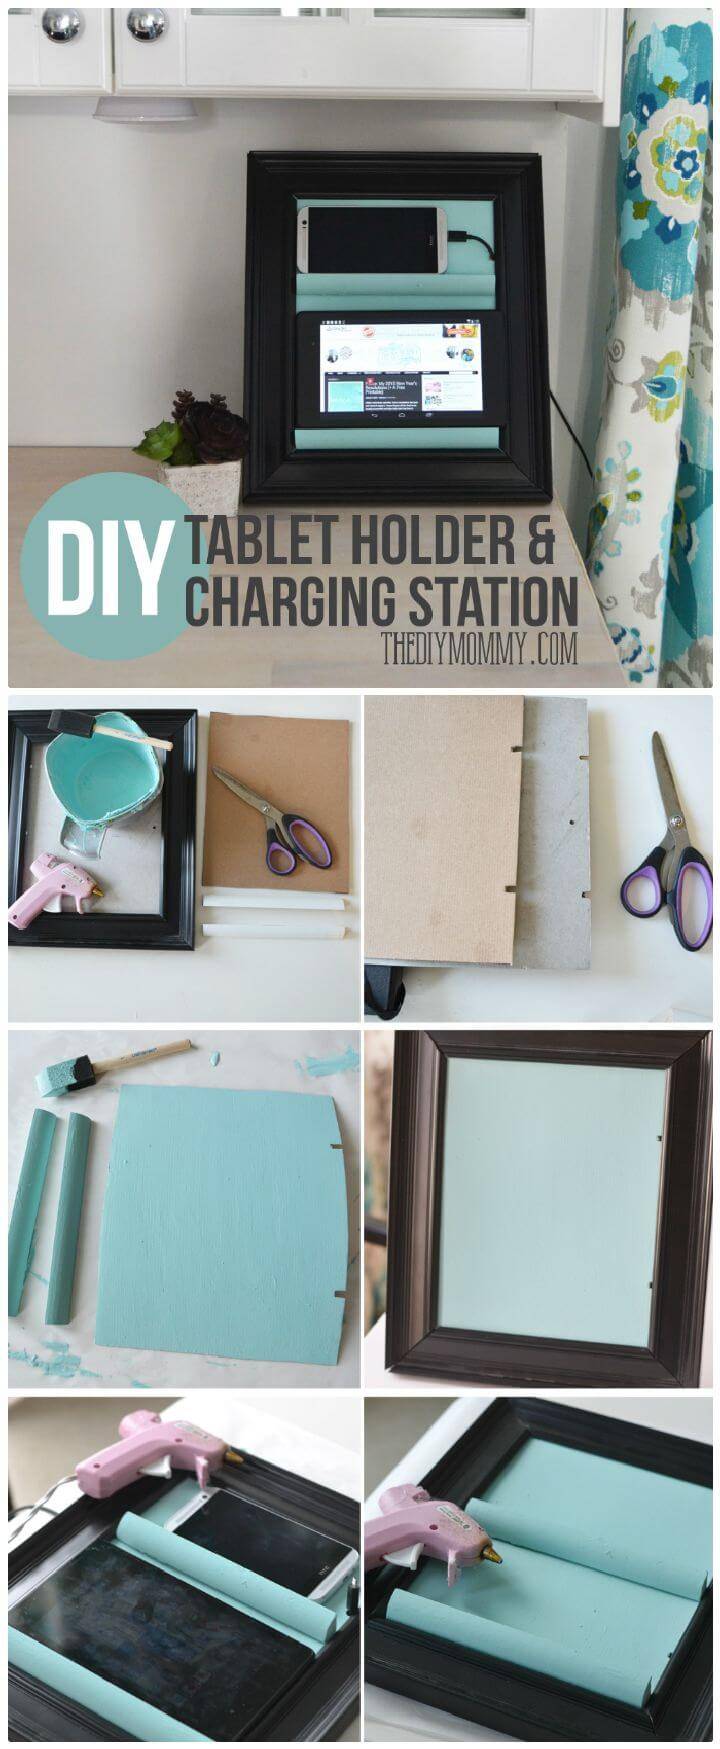 DIY Make A Counter Top Phone Charging Station & Tablet Holder From A Picture Frame